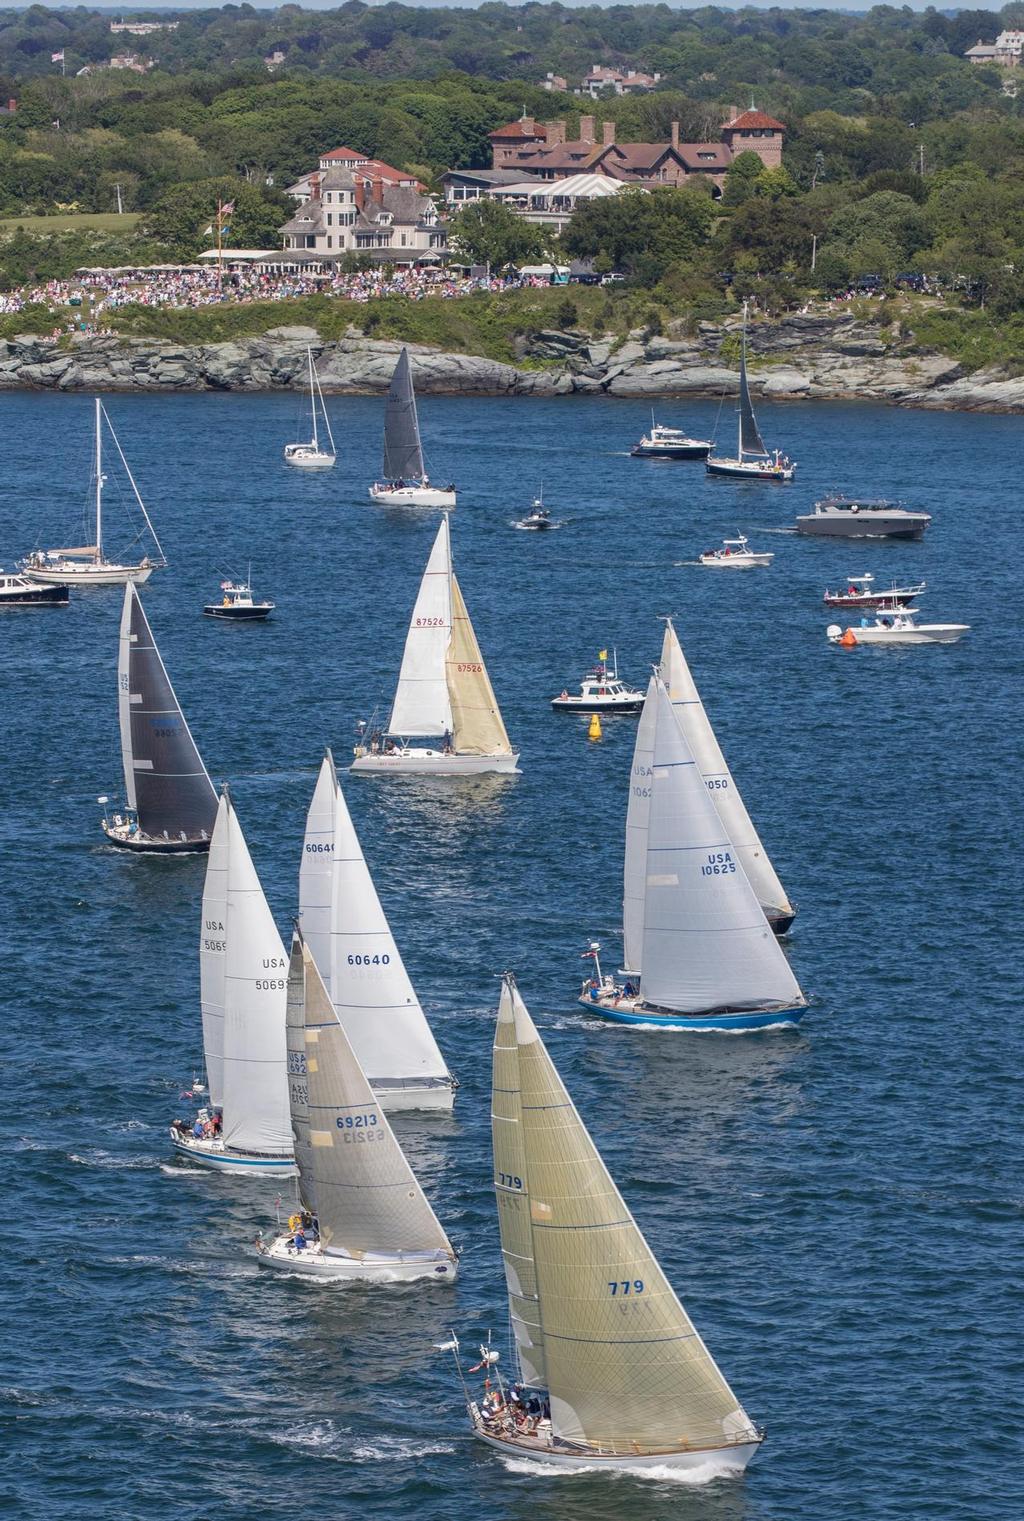 2016 Newport Bermuda Yacht Race start. Class 4 St David&rsquo;s Lighthouse Trophy: 779 FROYA, (McCurdy & Rhodes 46 skippered by Briggs Tobin from Ridgefield CT) 2016 Newport Bermuda Yacht Race start.  ZIPPORAH USA 69213 skippered by Doug Mann from St Paul MN.
MORGAN OF MARIETTA, USA 50692 skippered by Colin Golder  Centurion 42 from New Providence, NJ
PERIGEE USA 6 photo copyright Daniel Forster / PPL taken at  and featuring the  class